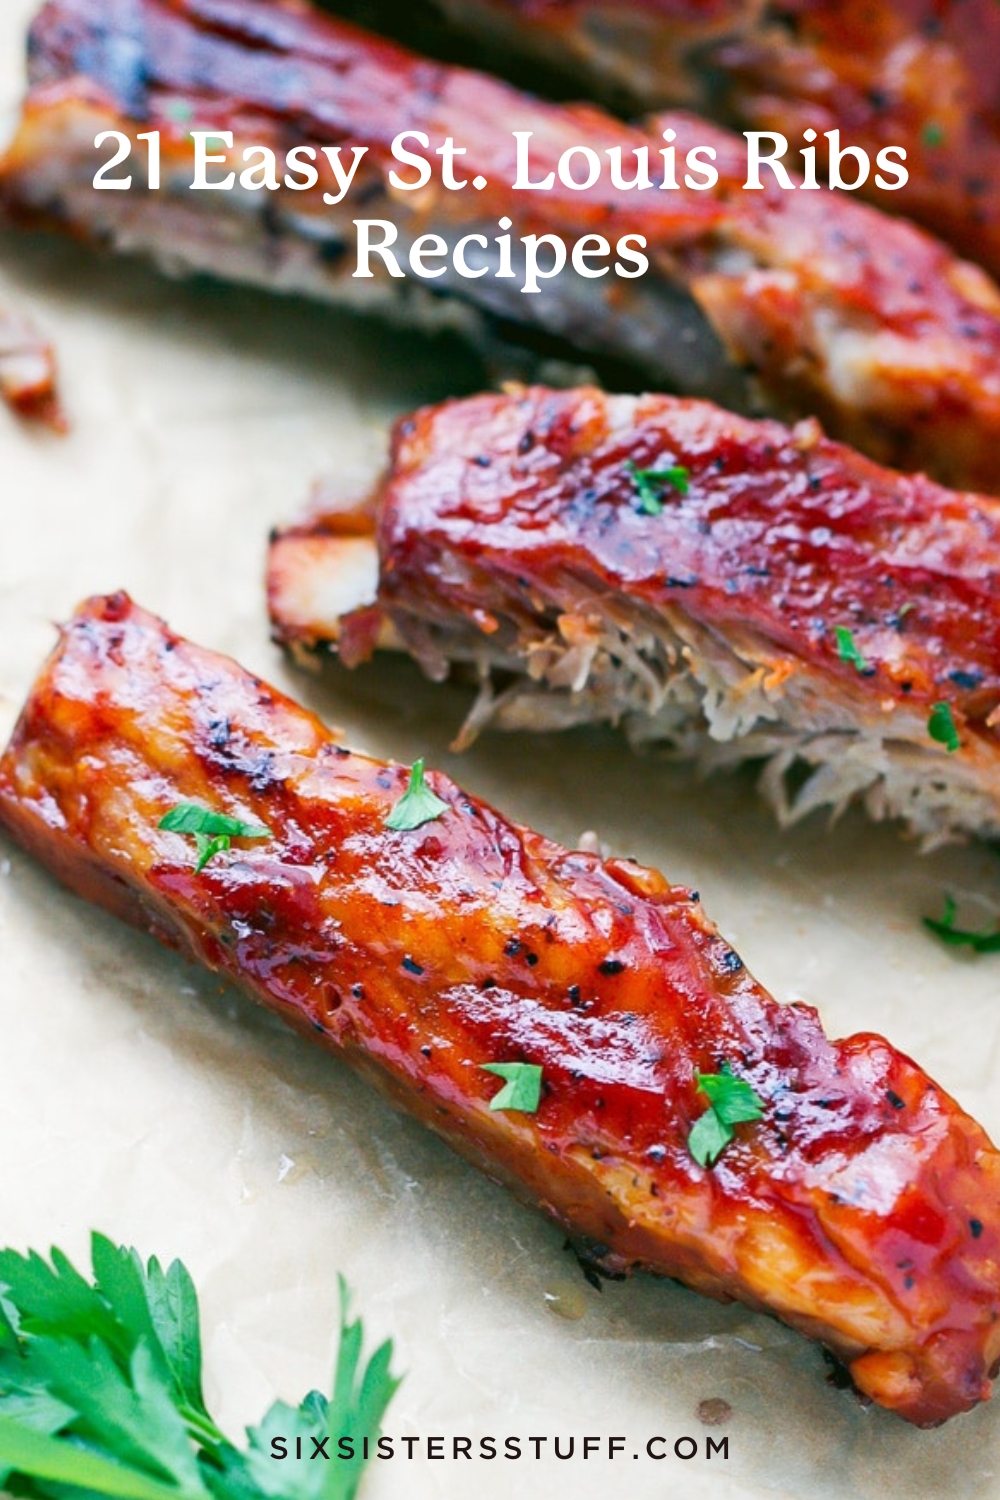 21 Easy St. Louis Ribs Recipes